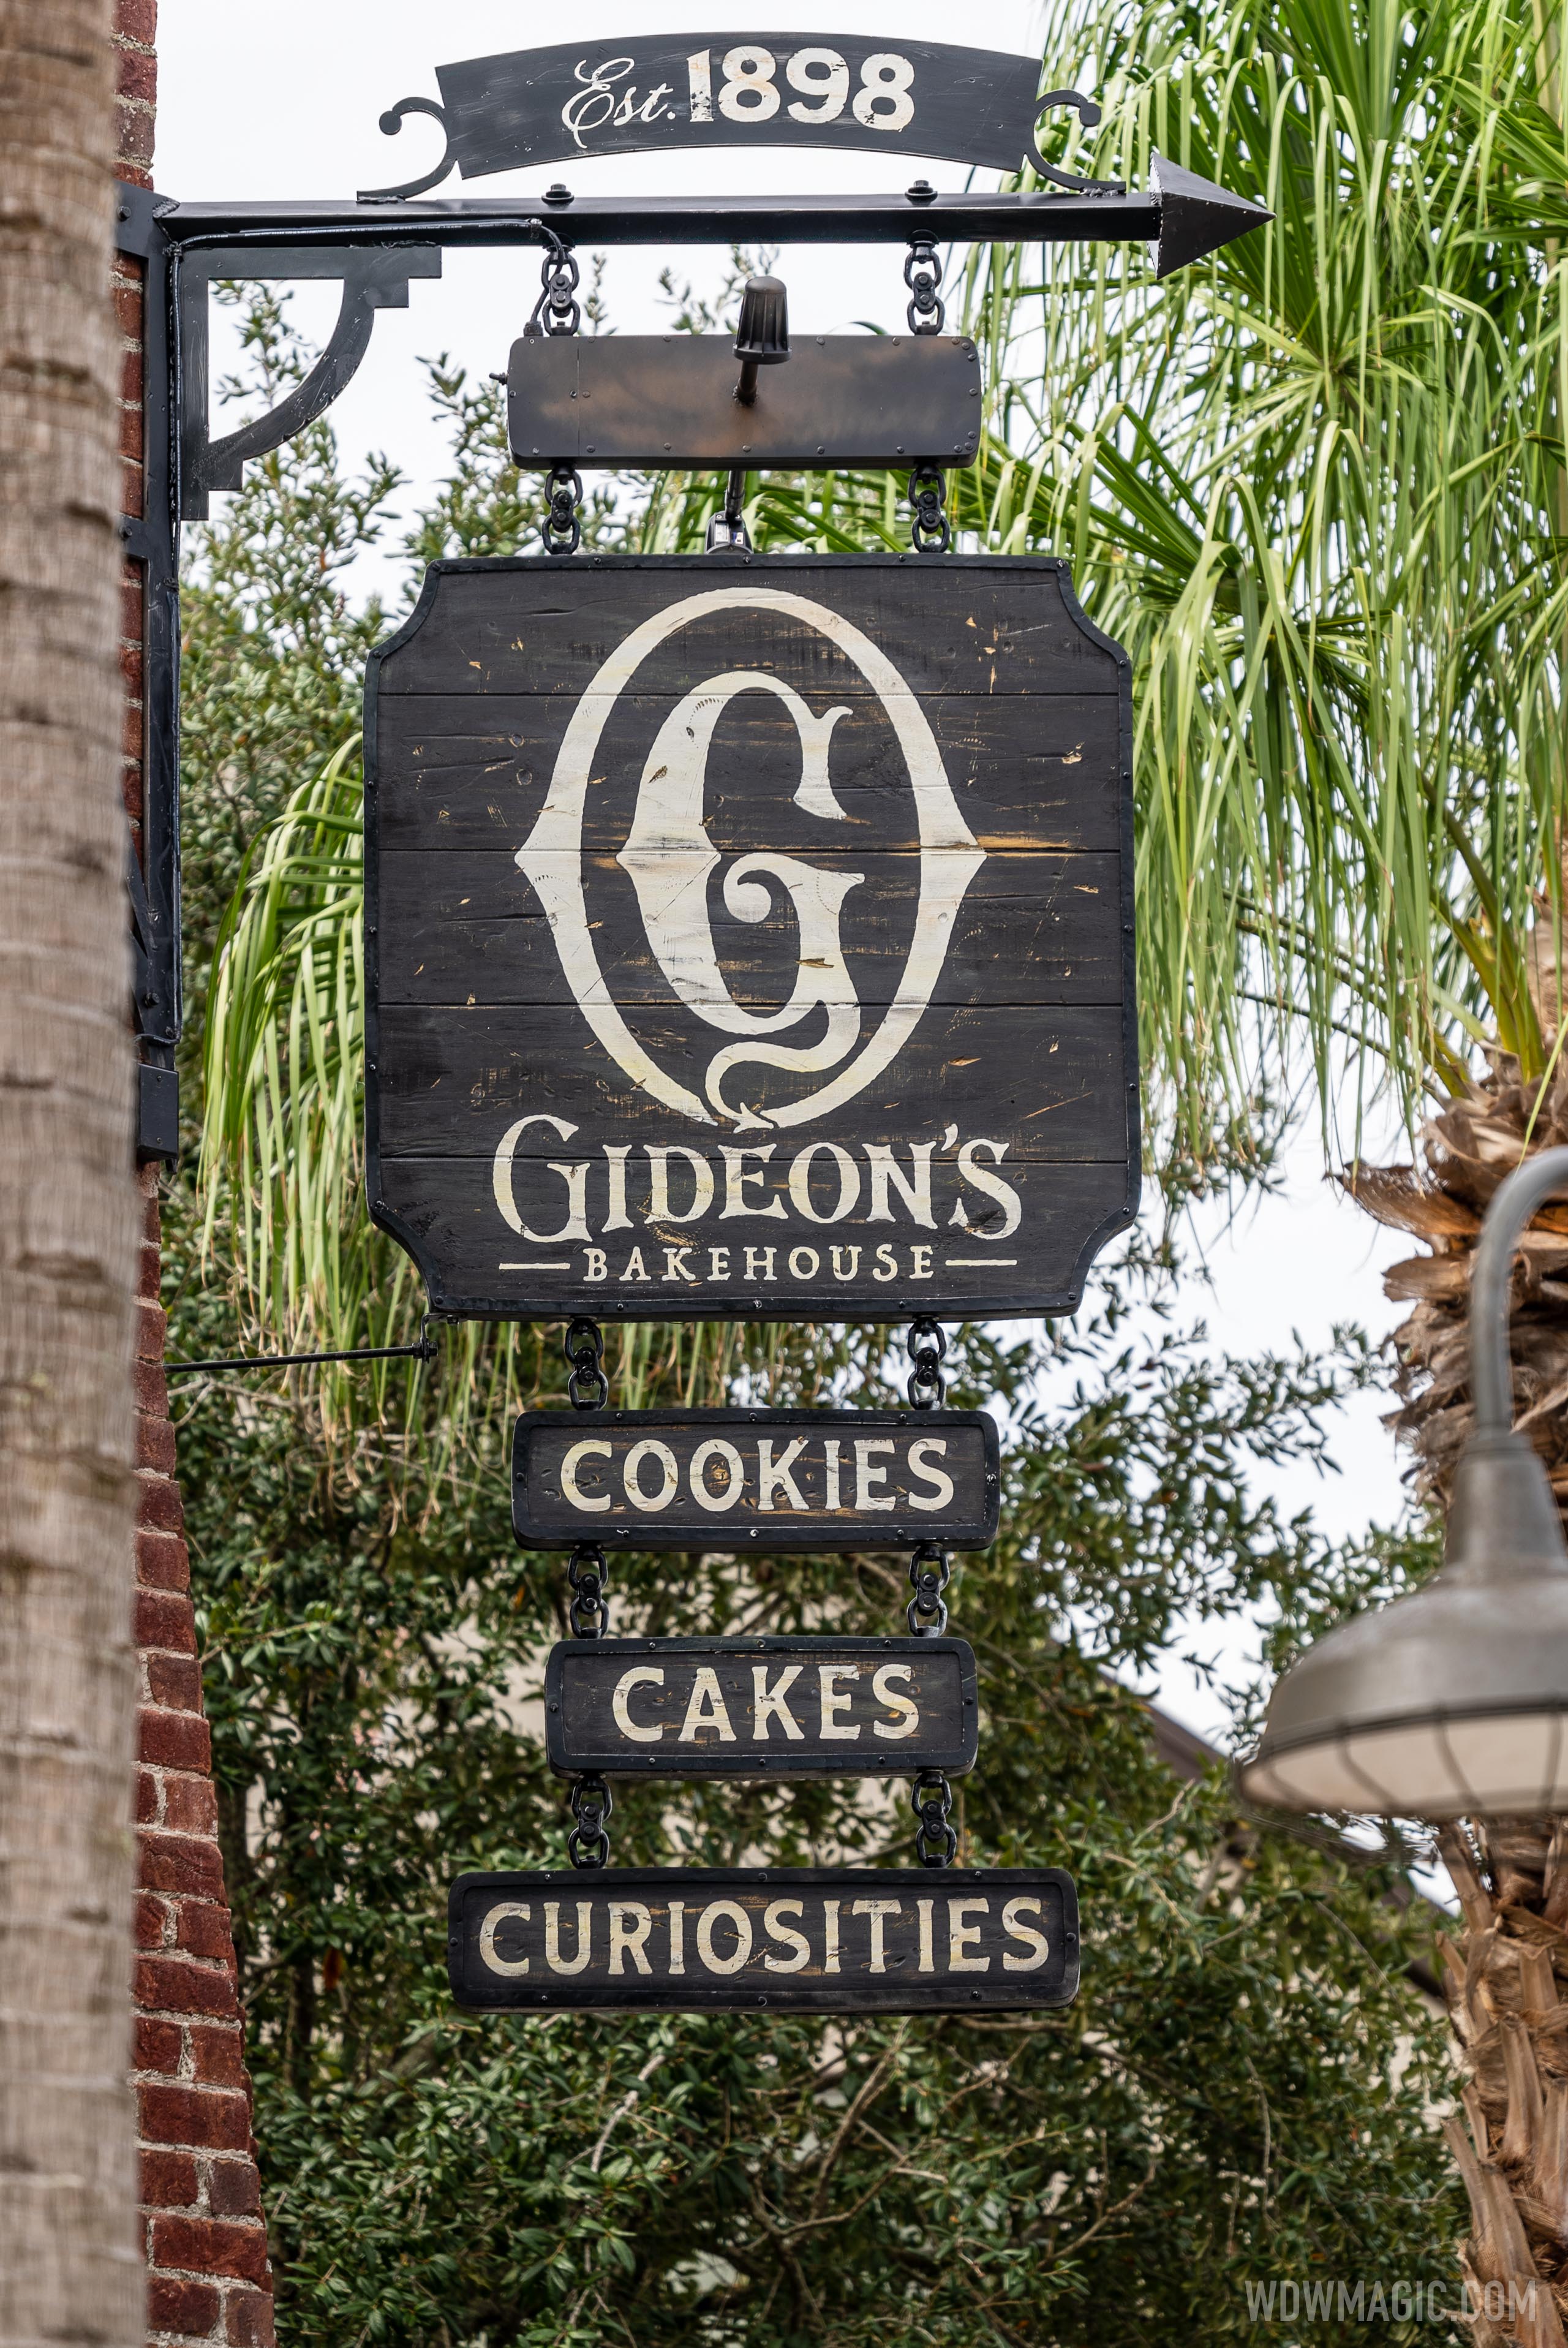 More exterior details arrive at Gideon’s Bakehouse in Disney Springs